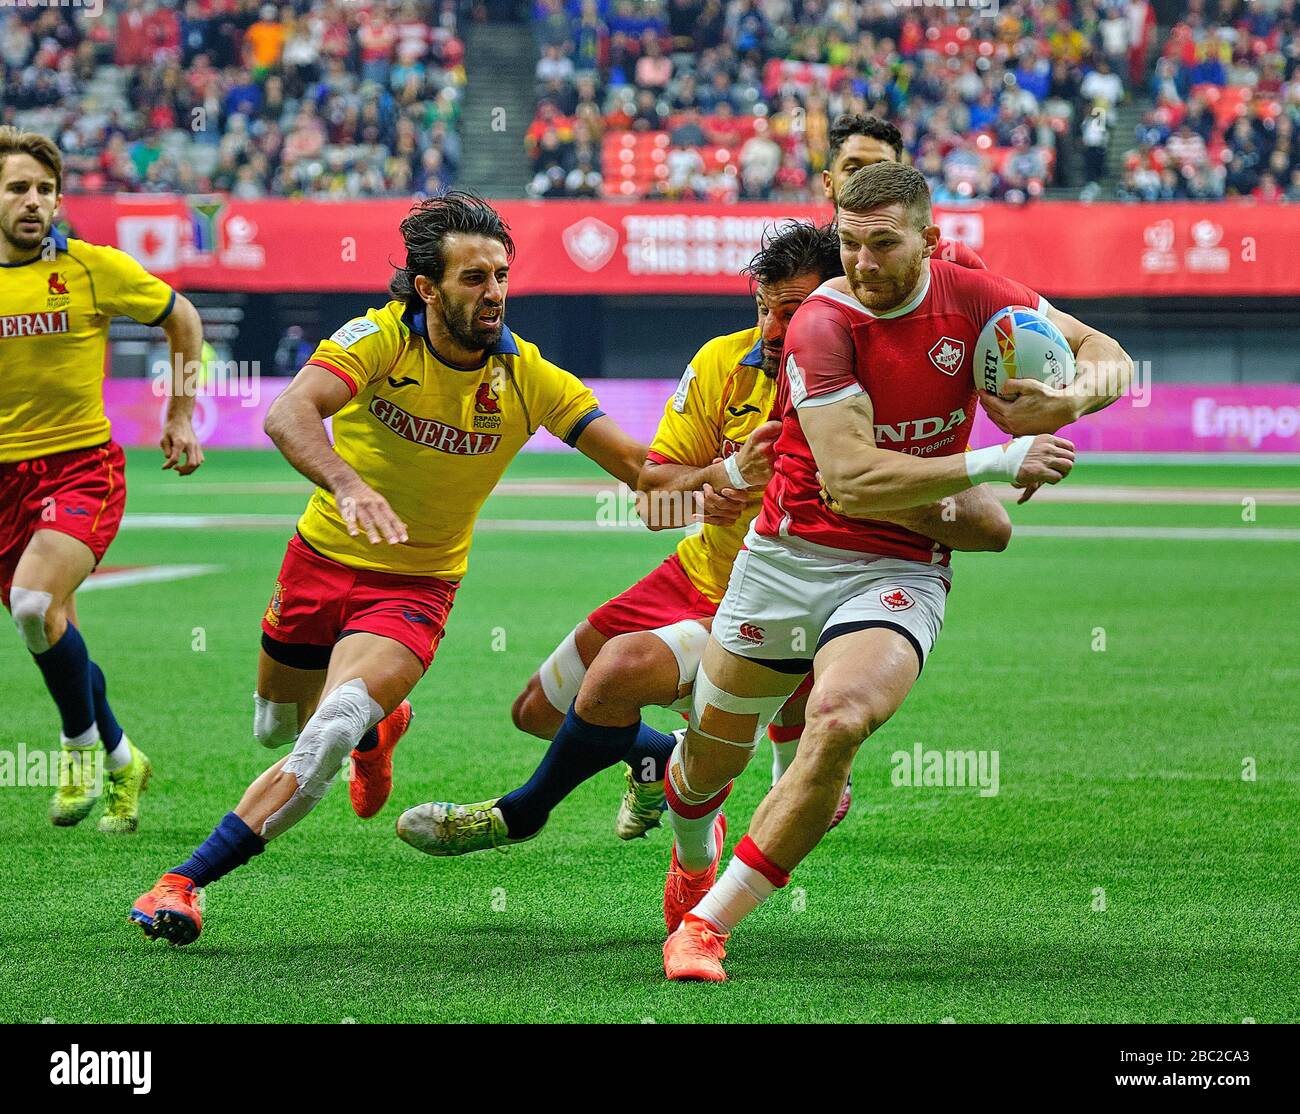 Vancouver, Canada. 8th March, 2020. Isaac Kaay #2 of Canada tackled by Spain players in Match #32 (Cup Quarter Finals) during Day 2 - 2020 HSBC World Stock Photo